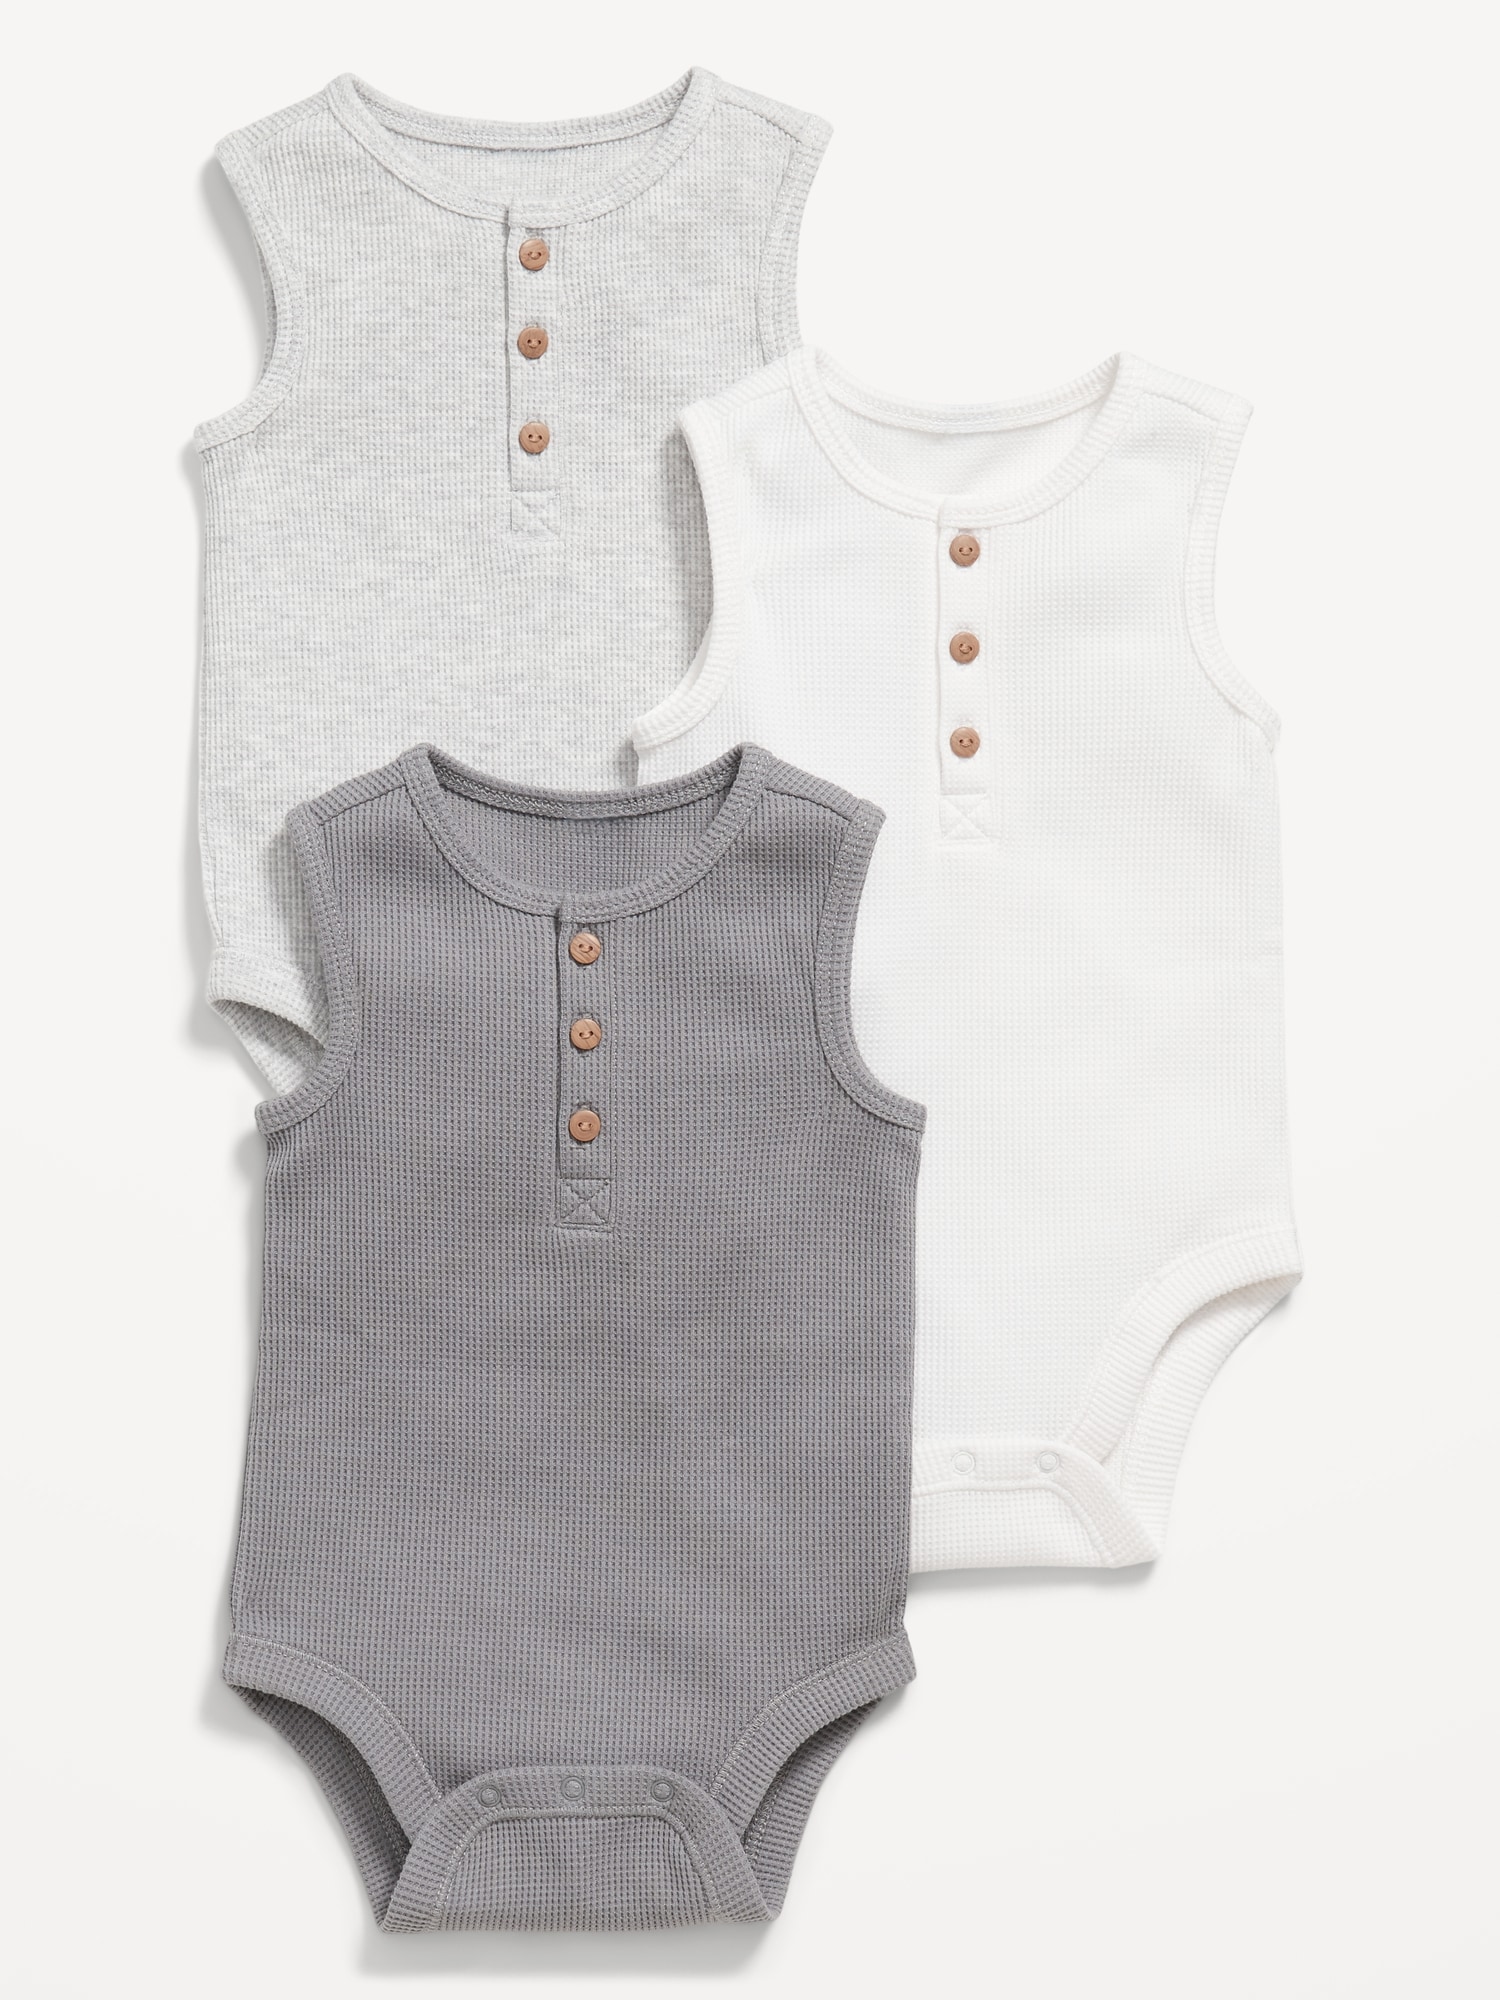 Baby Bodysuits & Tops - Old Navy Philippines